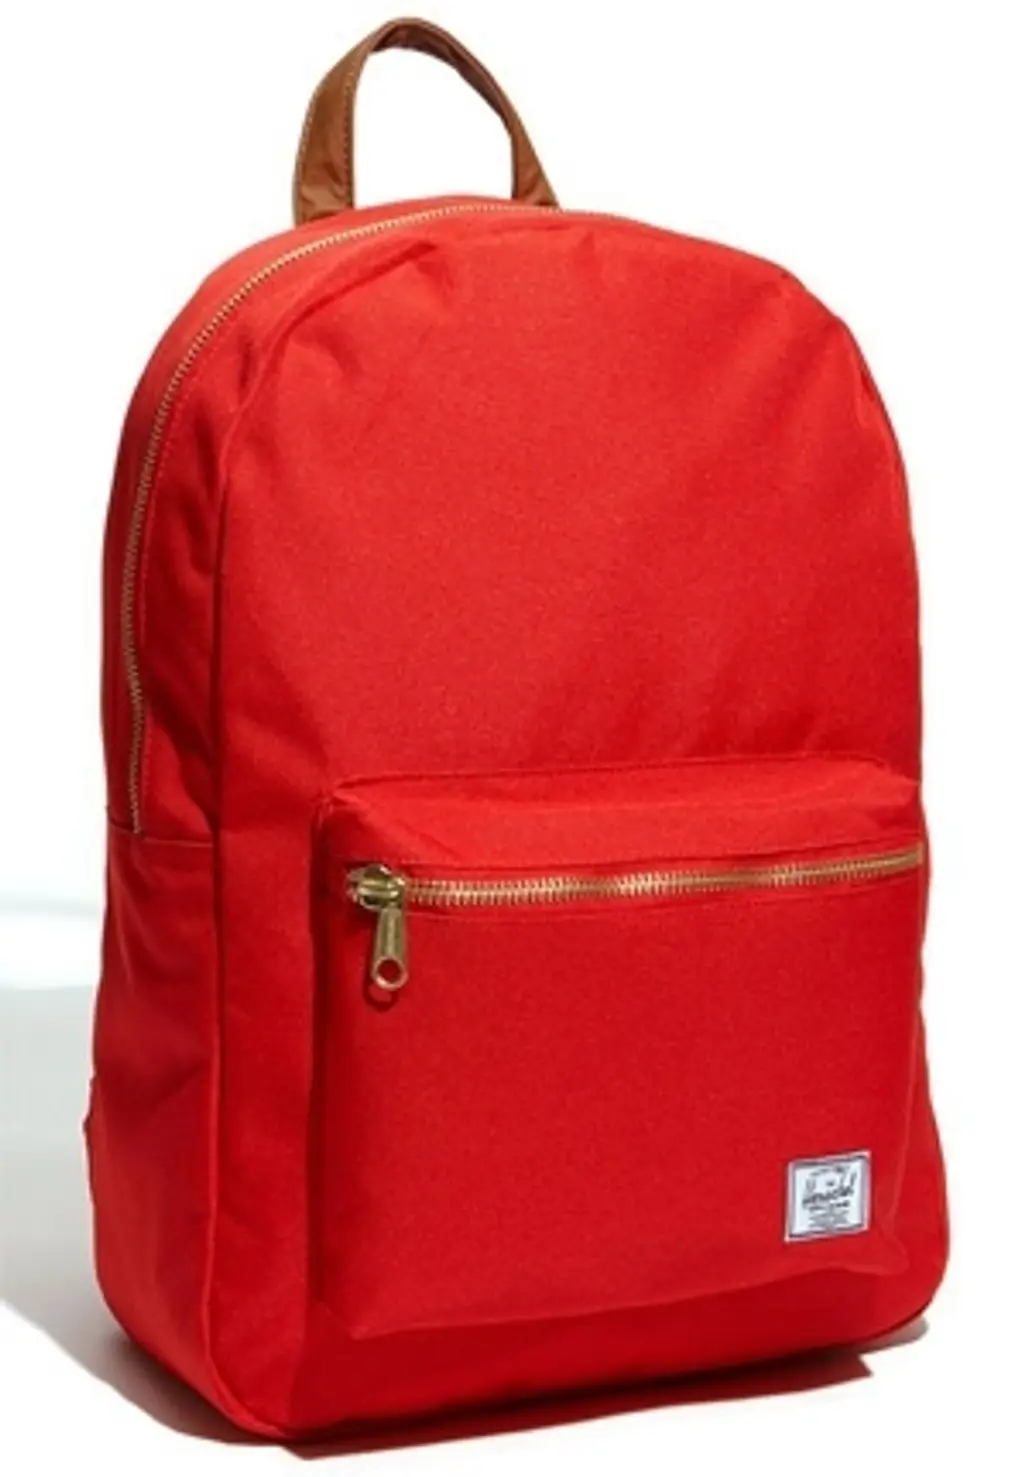 8 Fashionable and Affordable Backpacks ...